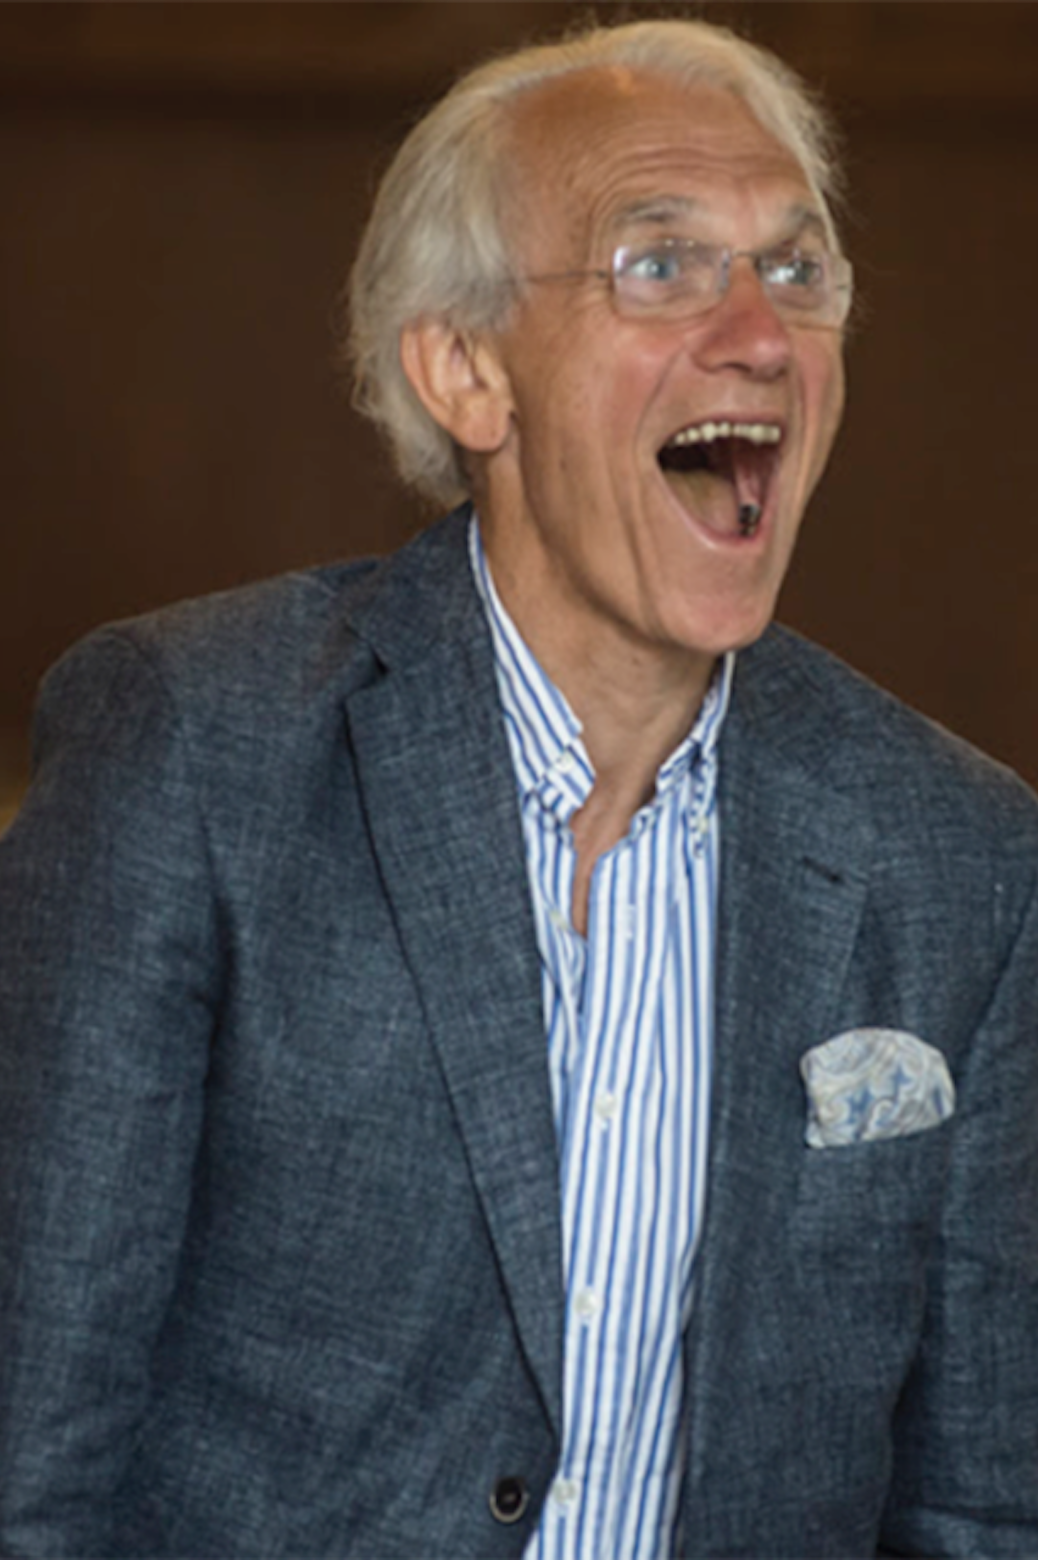 Gérard Mourou standing up with his mouth open